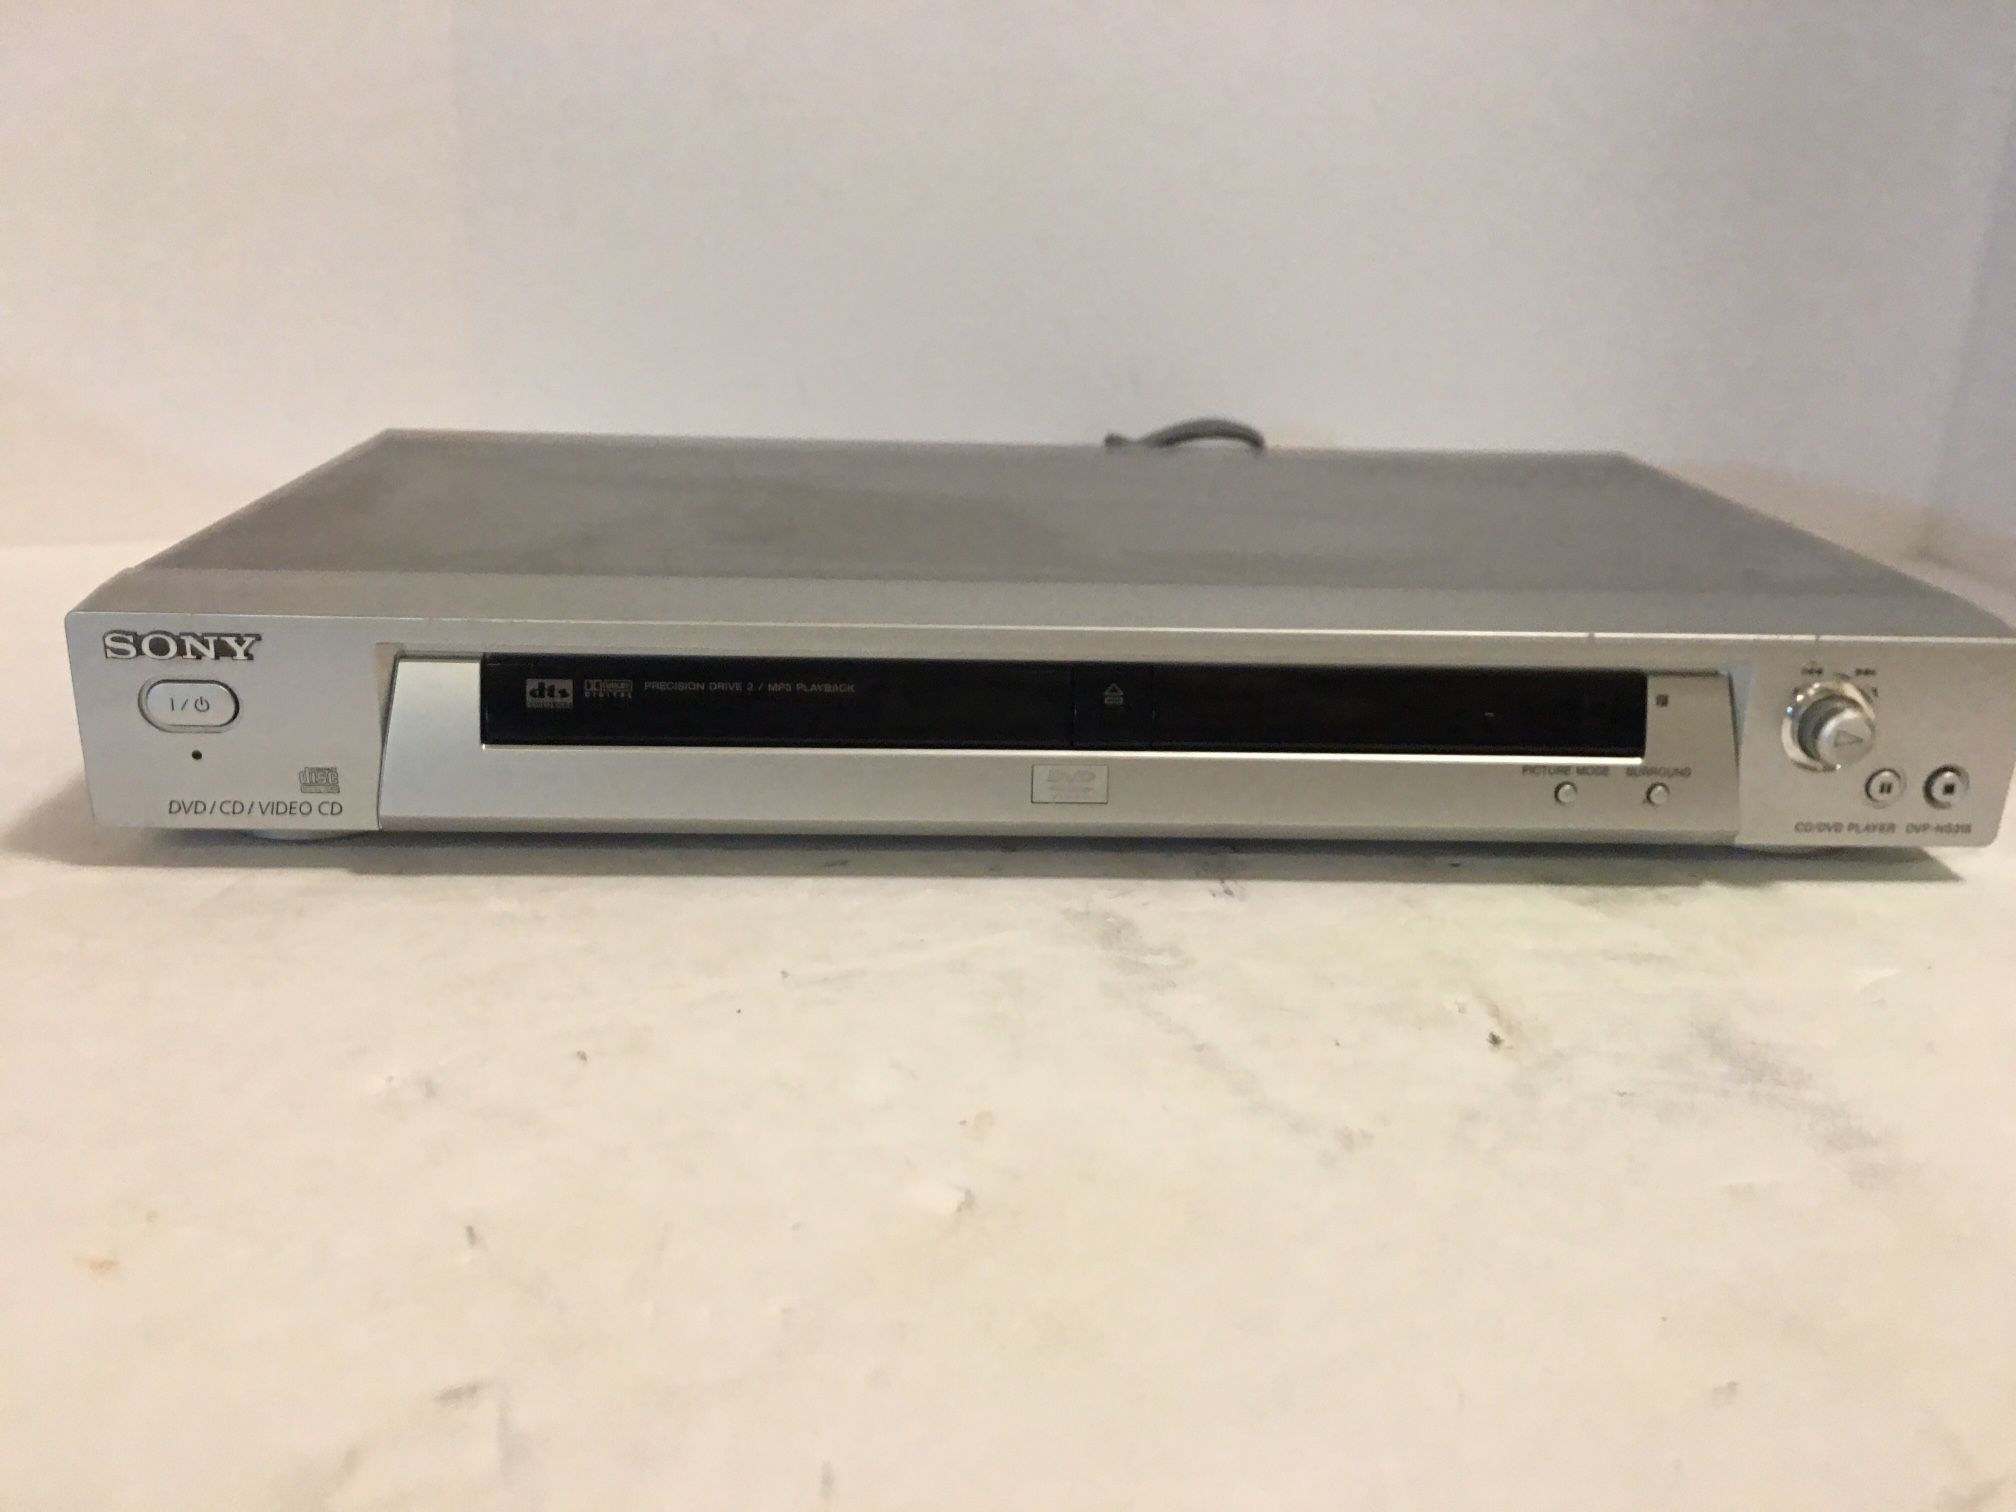 Sony DVD/Cd/MP3 Player, Model# DVP-NS315, tested & works, NO remote, silver , some scratches on top of unit. Playable formats: DVD/CD & Video CD. 